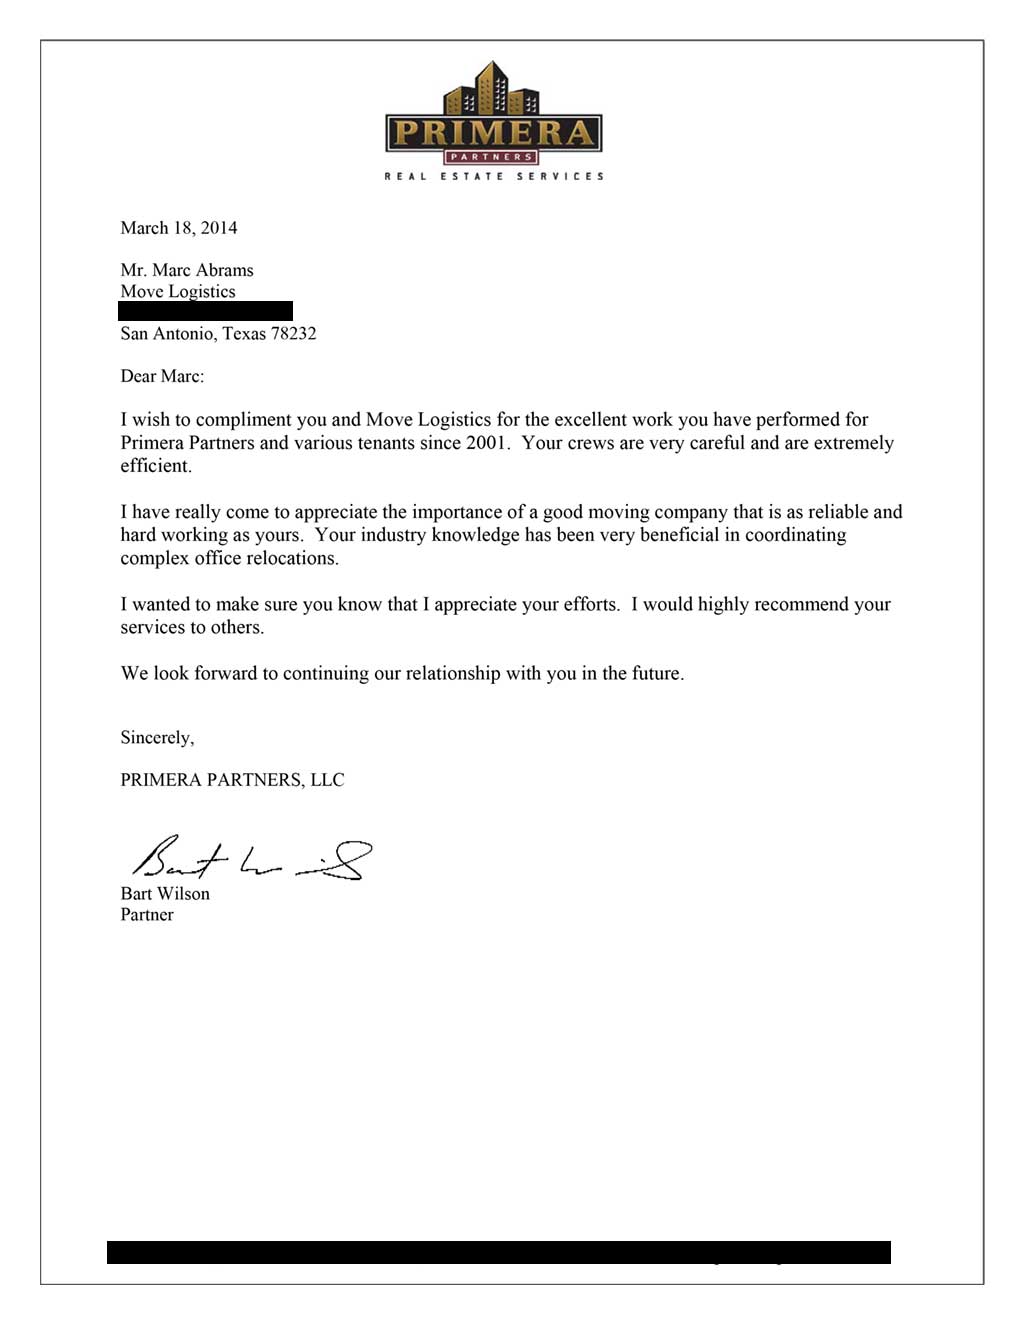 letter of recommendation for professional relocation services